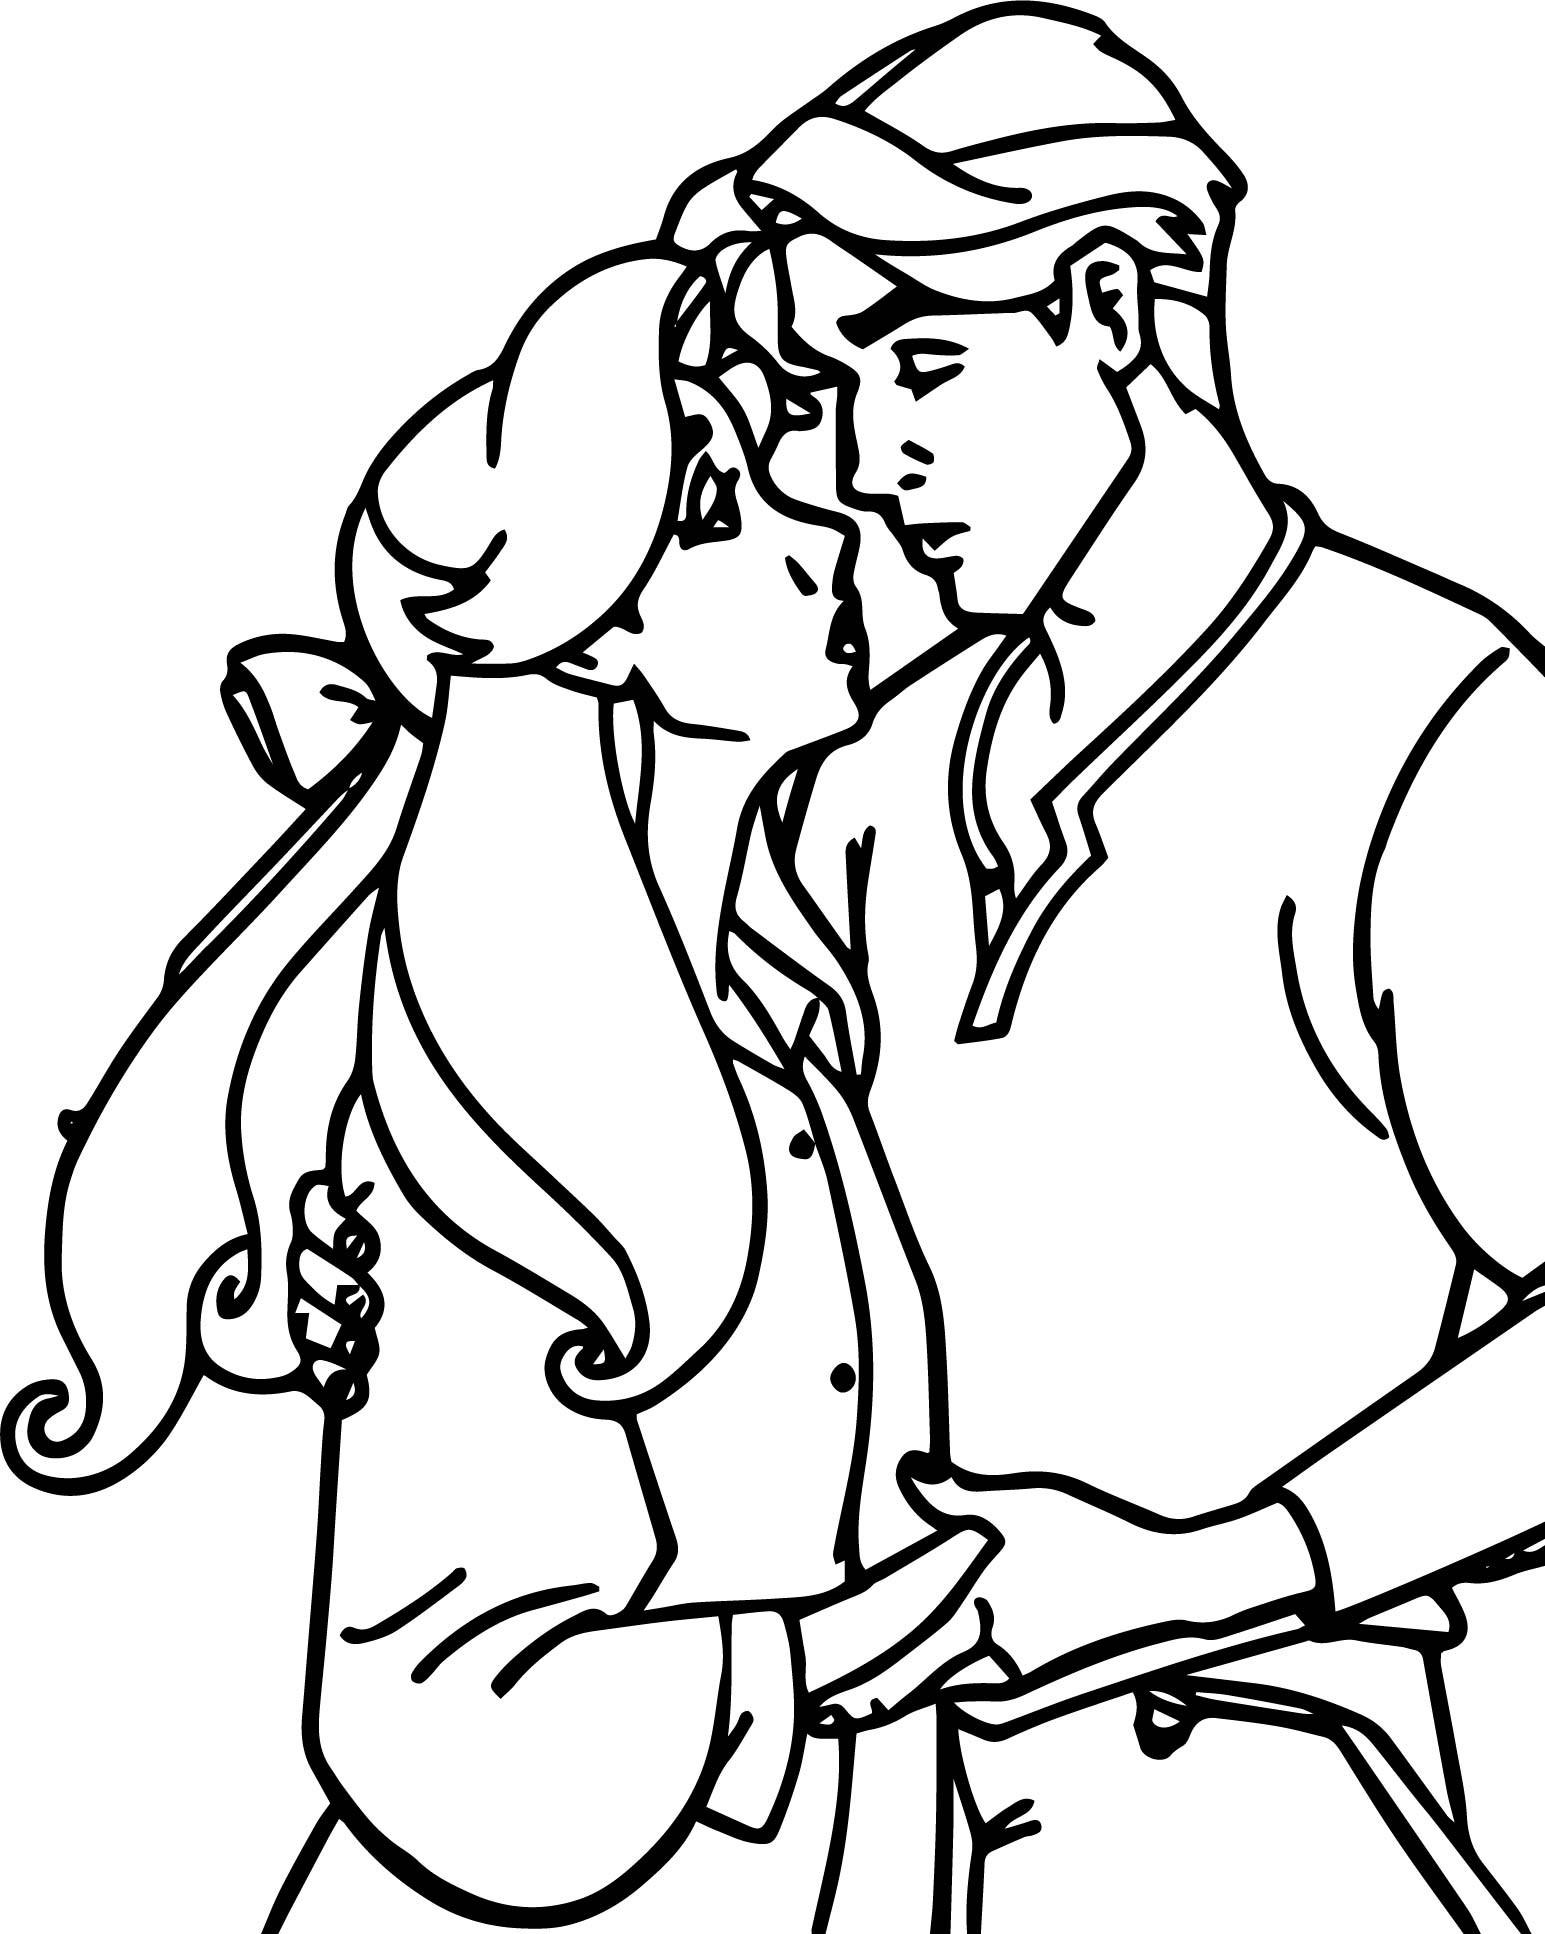 Boyfriend And Girlfriend Coloring Pages
 Boyfriend Pages Coloring Pages